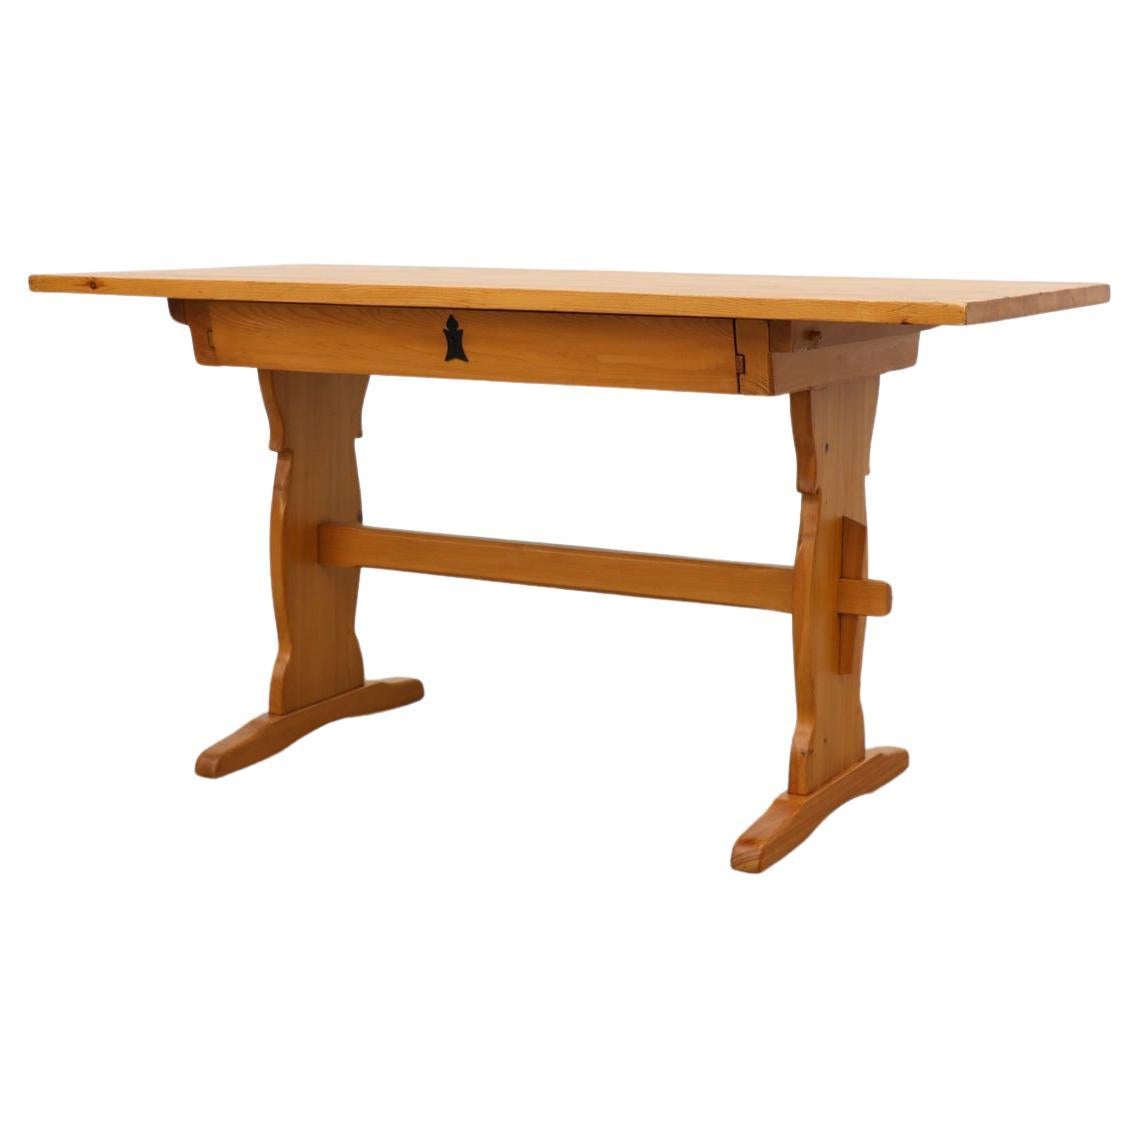 Tyrolean Style Ornate Pine Desk or Table with Locking Drawer from Austria For Sale